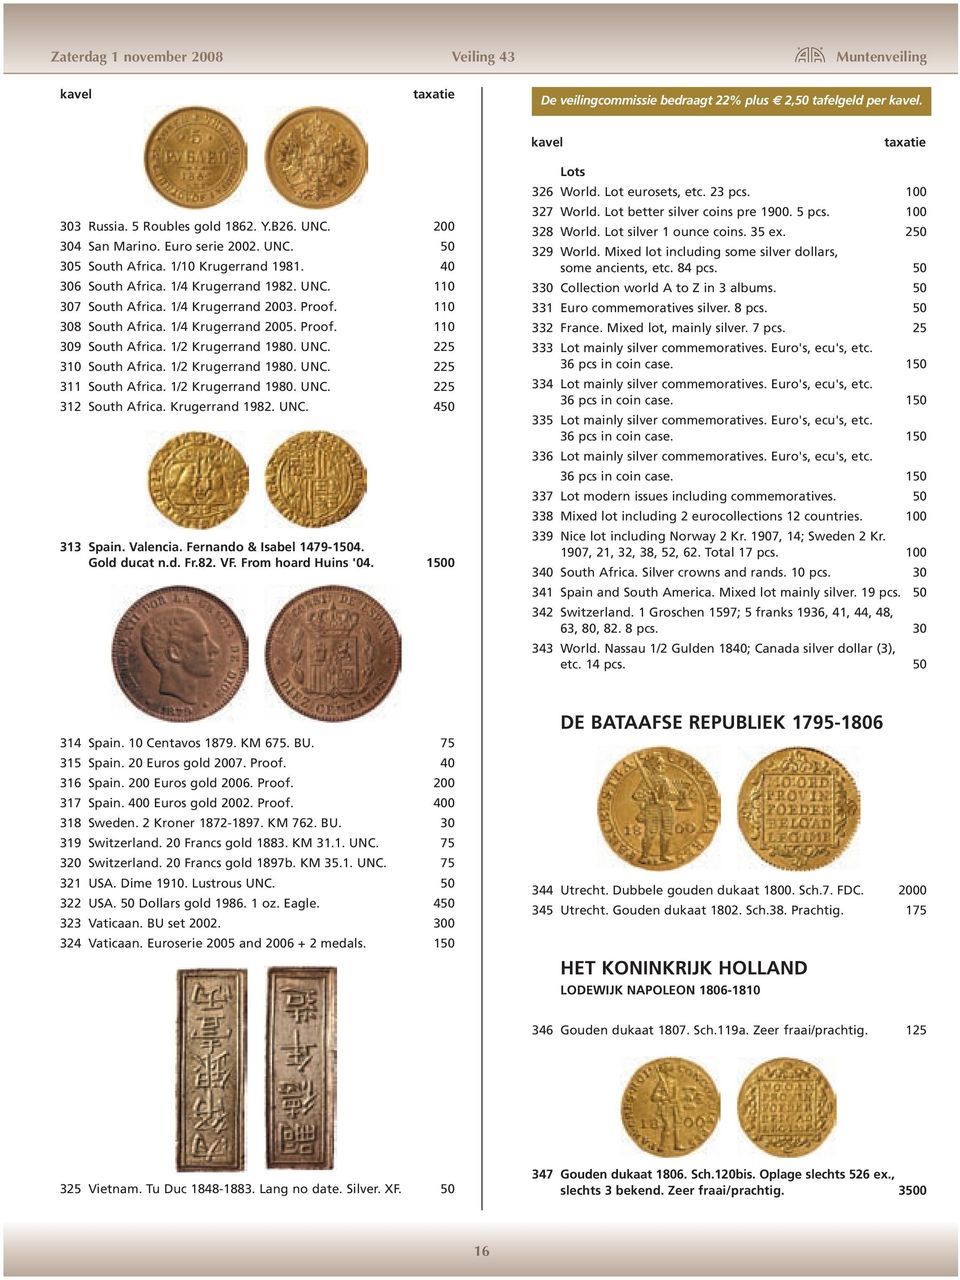 110 308 South Africa. 1/4 Krugerrand 2005. Proof. 110 309 South Africa. 1/2 Krugerrand 1980. UNC. 225 310 South Africa. 1/2 Krugerrand 1980. UNC. 225 311 South Africa. 1/2 Krugerrand 1980. UNC. 225 312 South Africa.